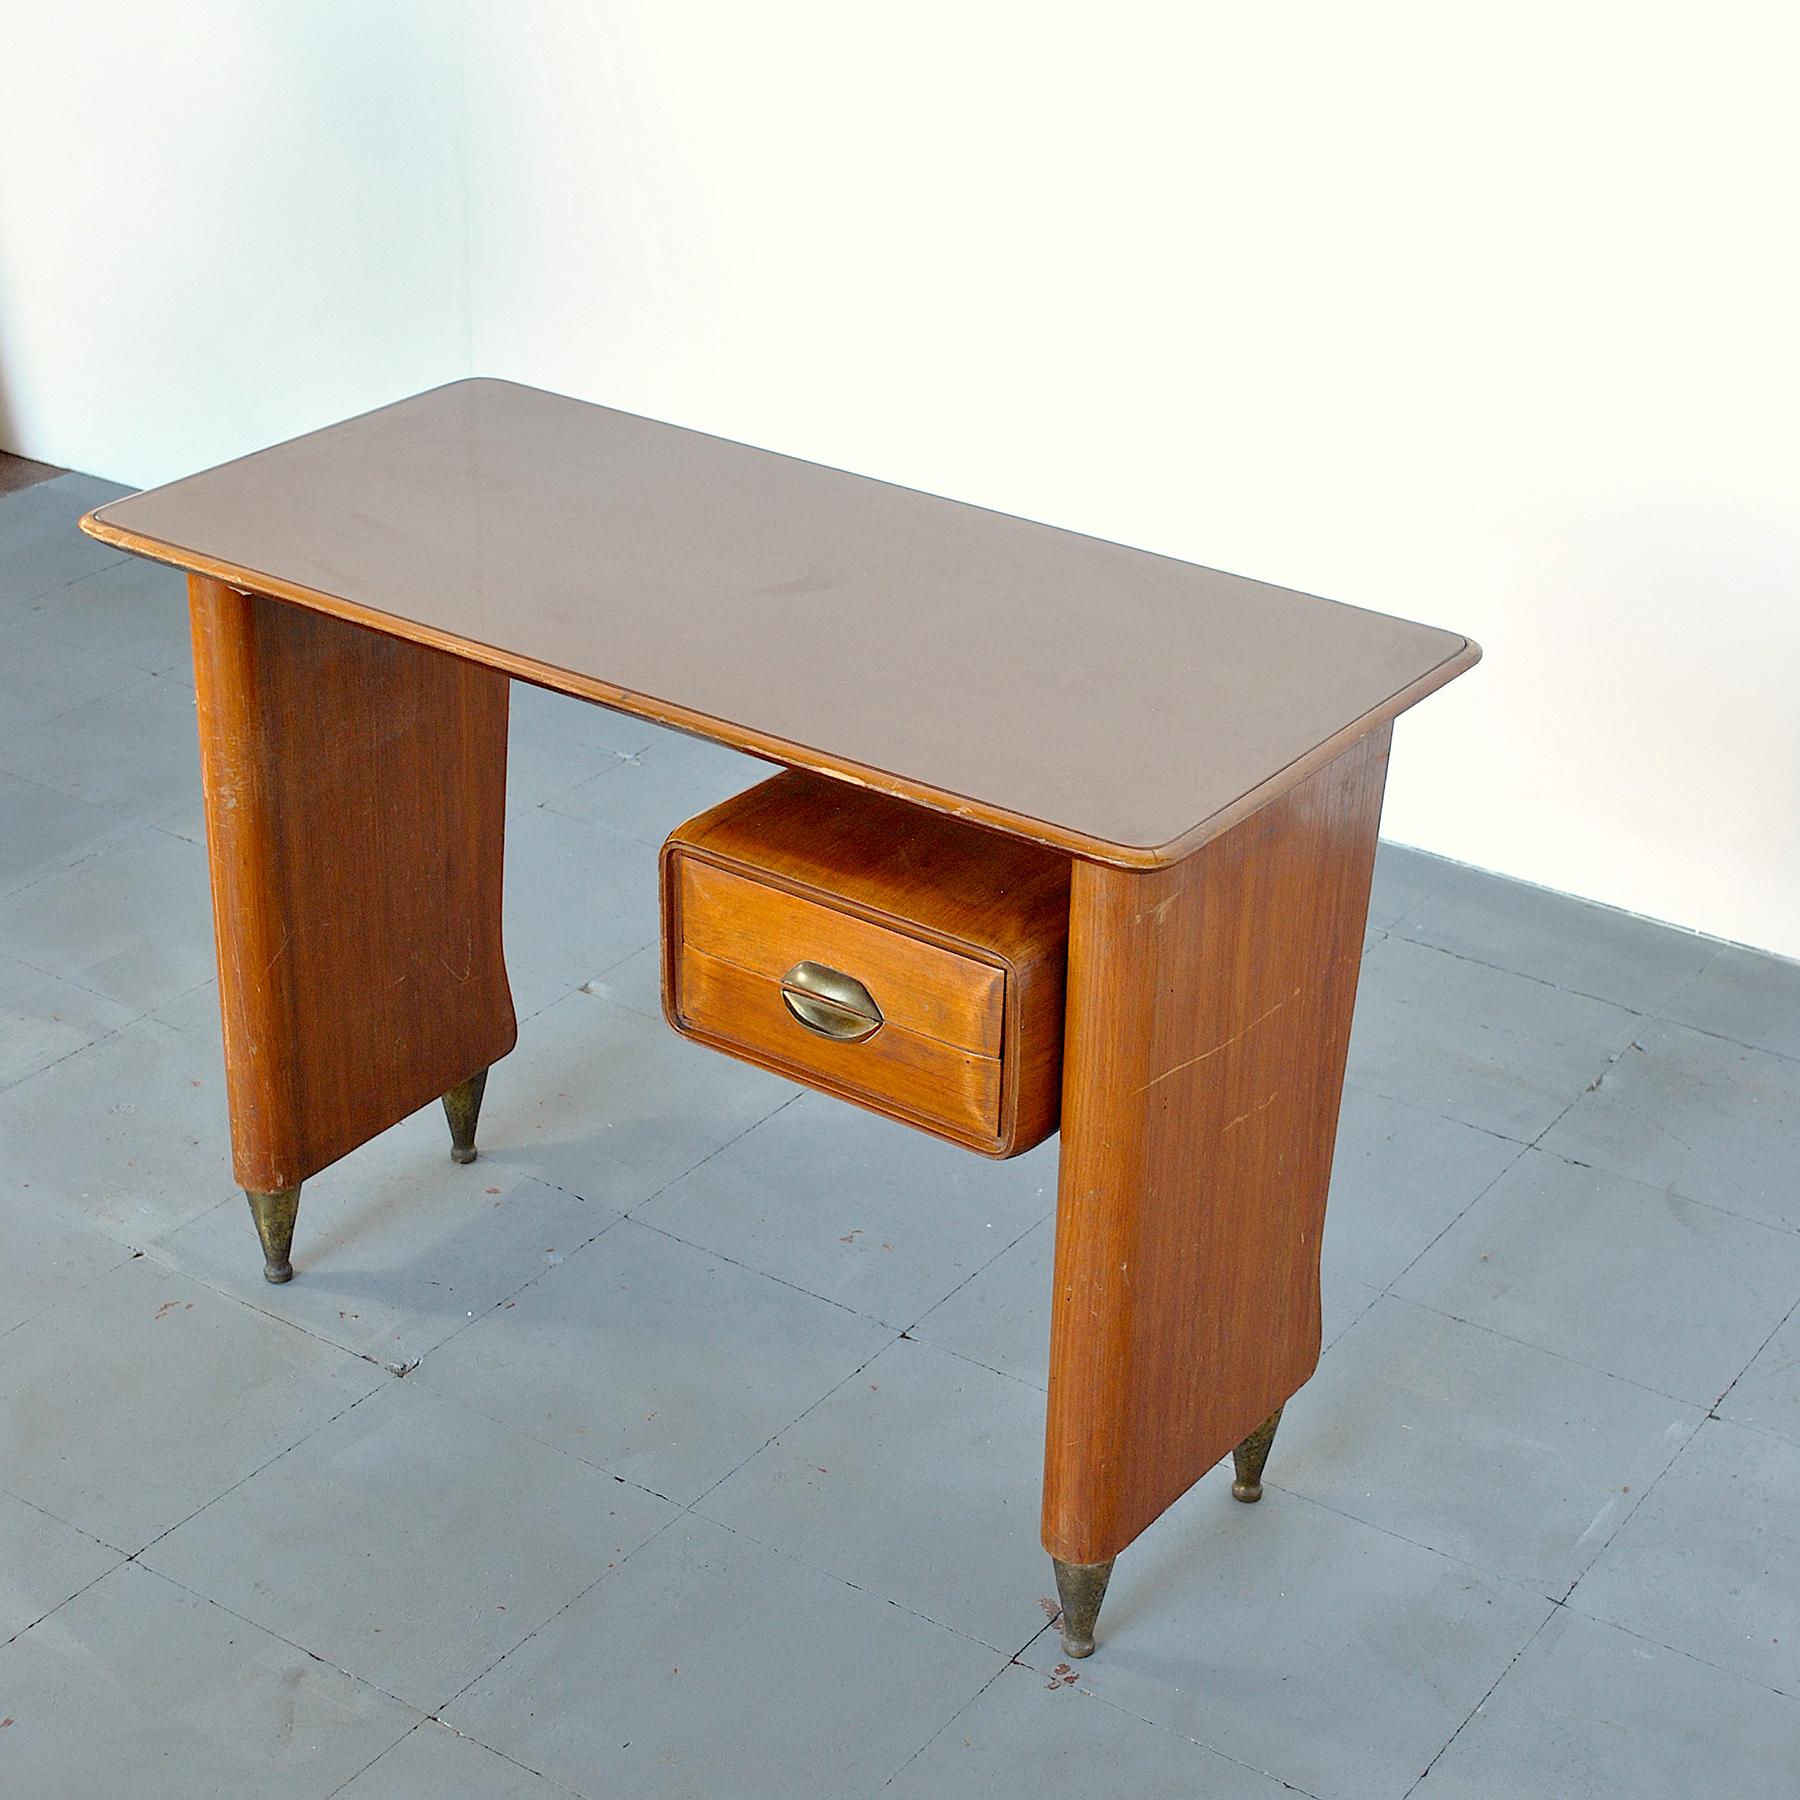 Little desk in wood and finishes in brass by Vittorio Dassi, late 1950s.